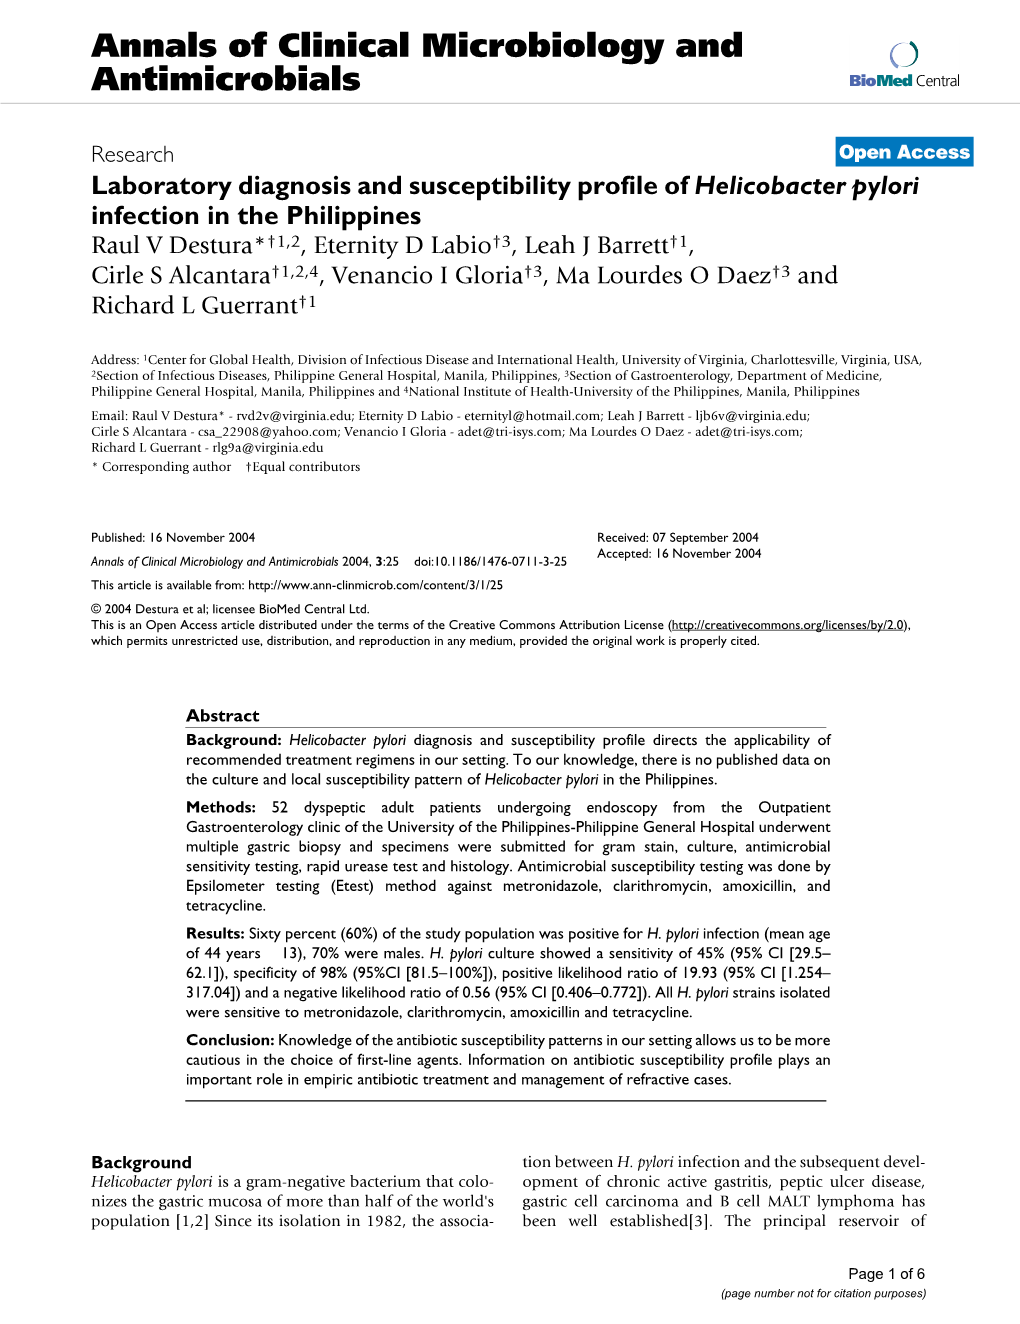 Laboratory Diagnosis and Susceptibility Profile of Helicobacter